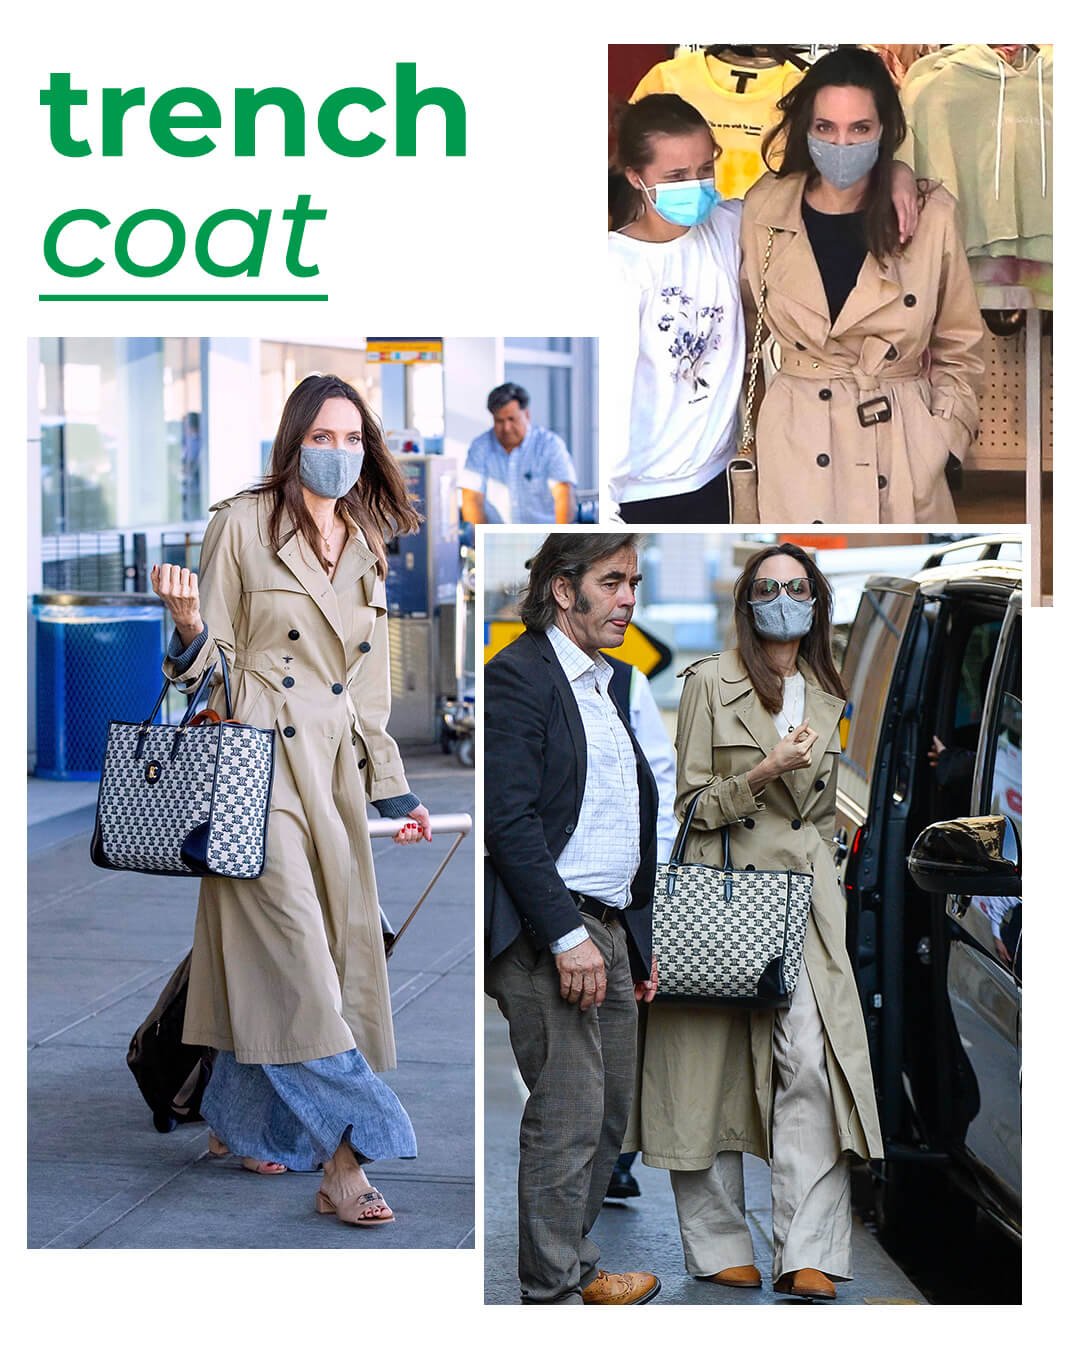 Angelina Jolie - Angelina Jolie - Angelina Jolie - Inverno - Street Style - https://stealthelook.com.br